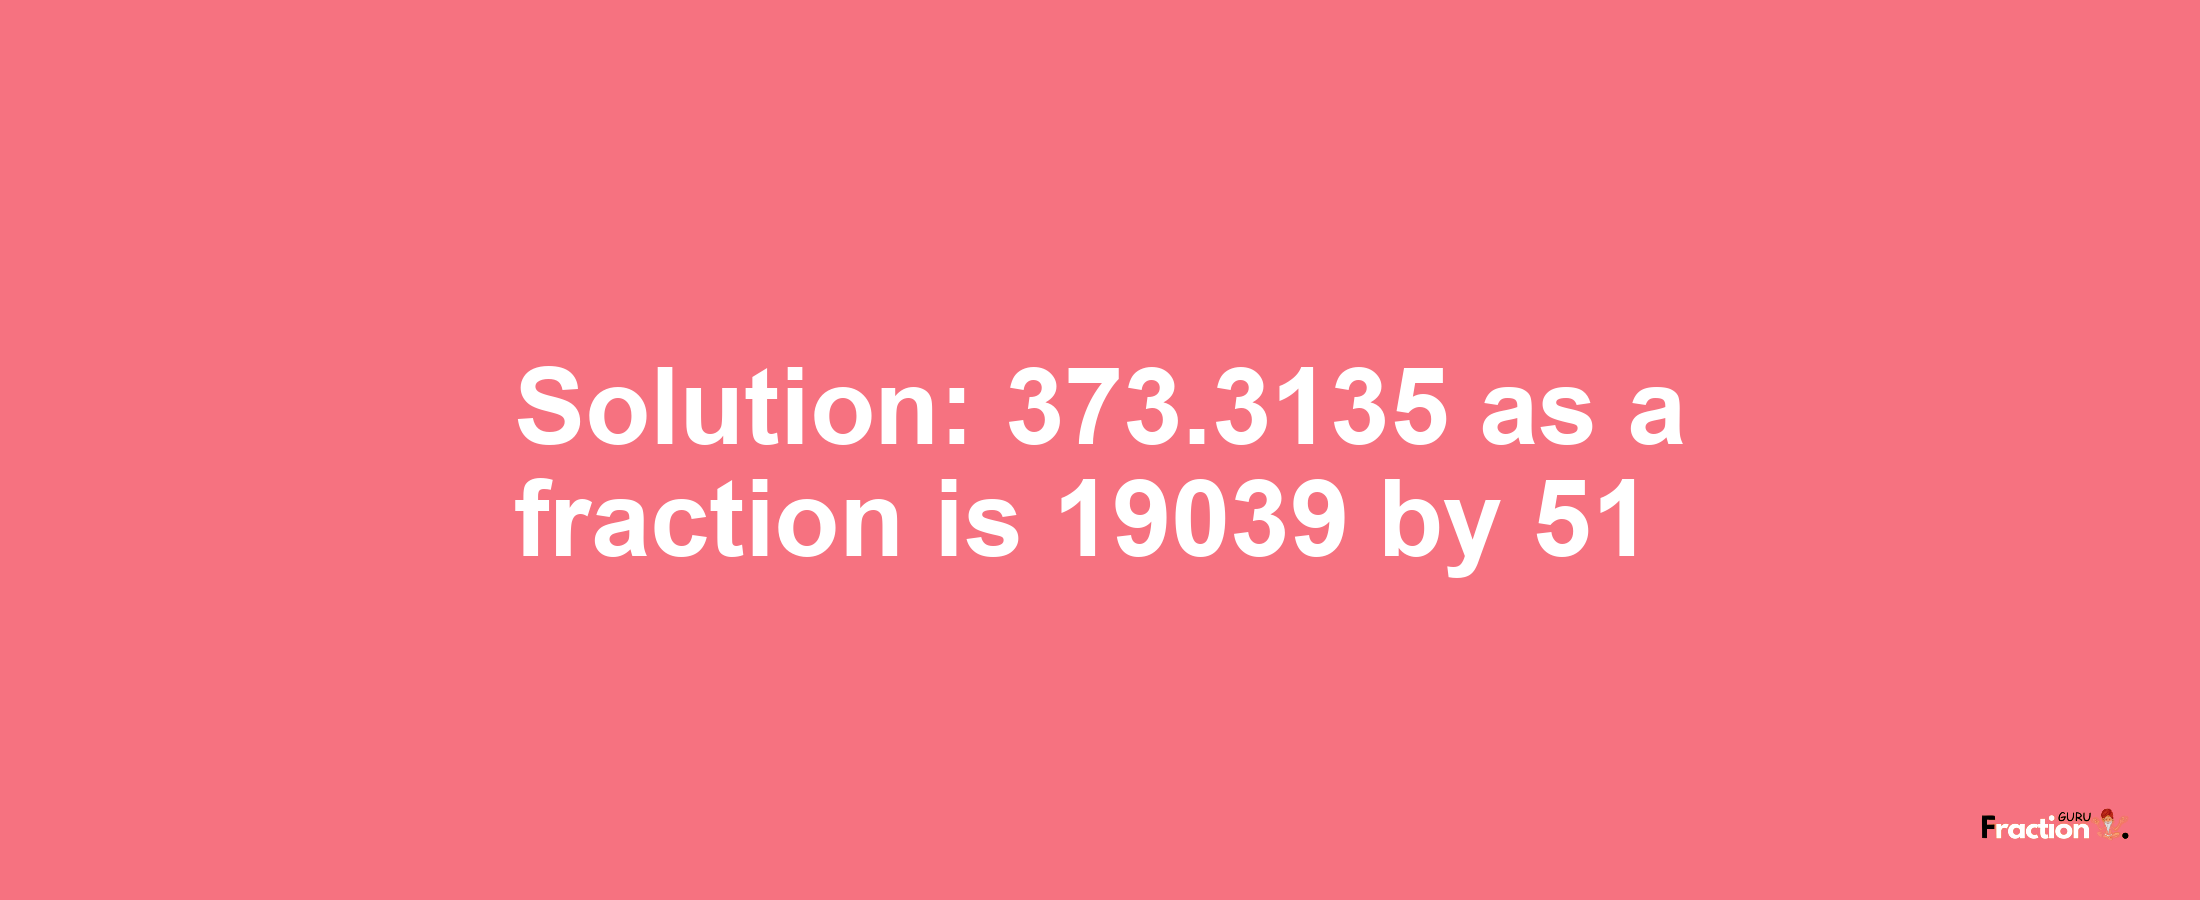 Solution:373.3135 as a fraction is 19039/51